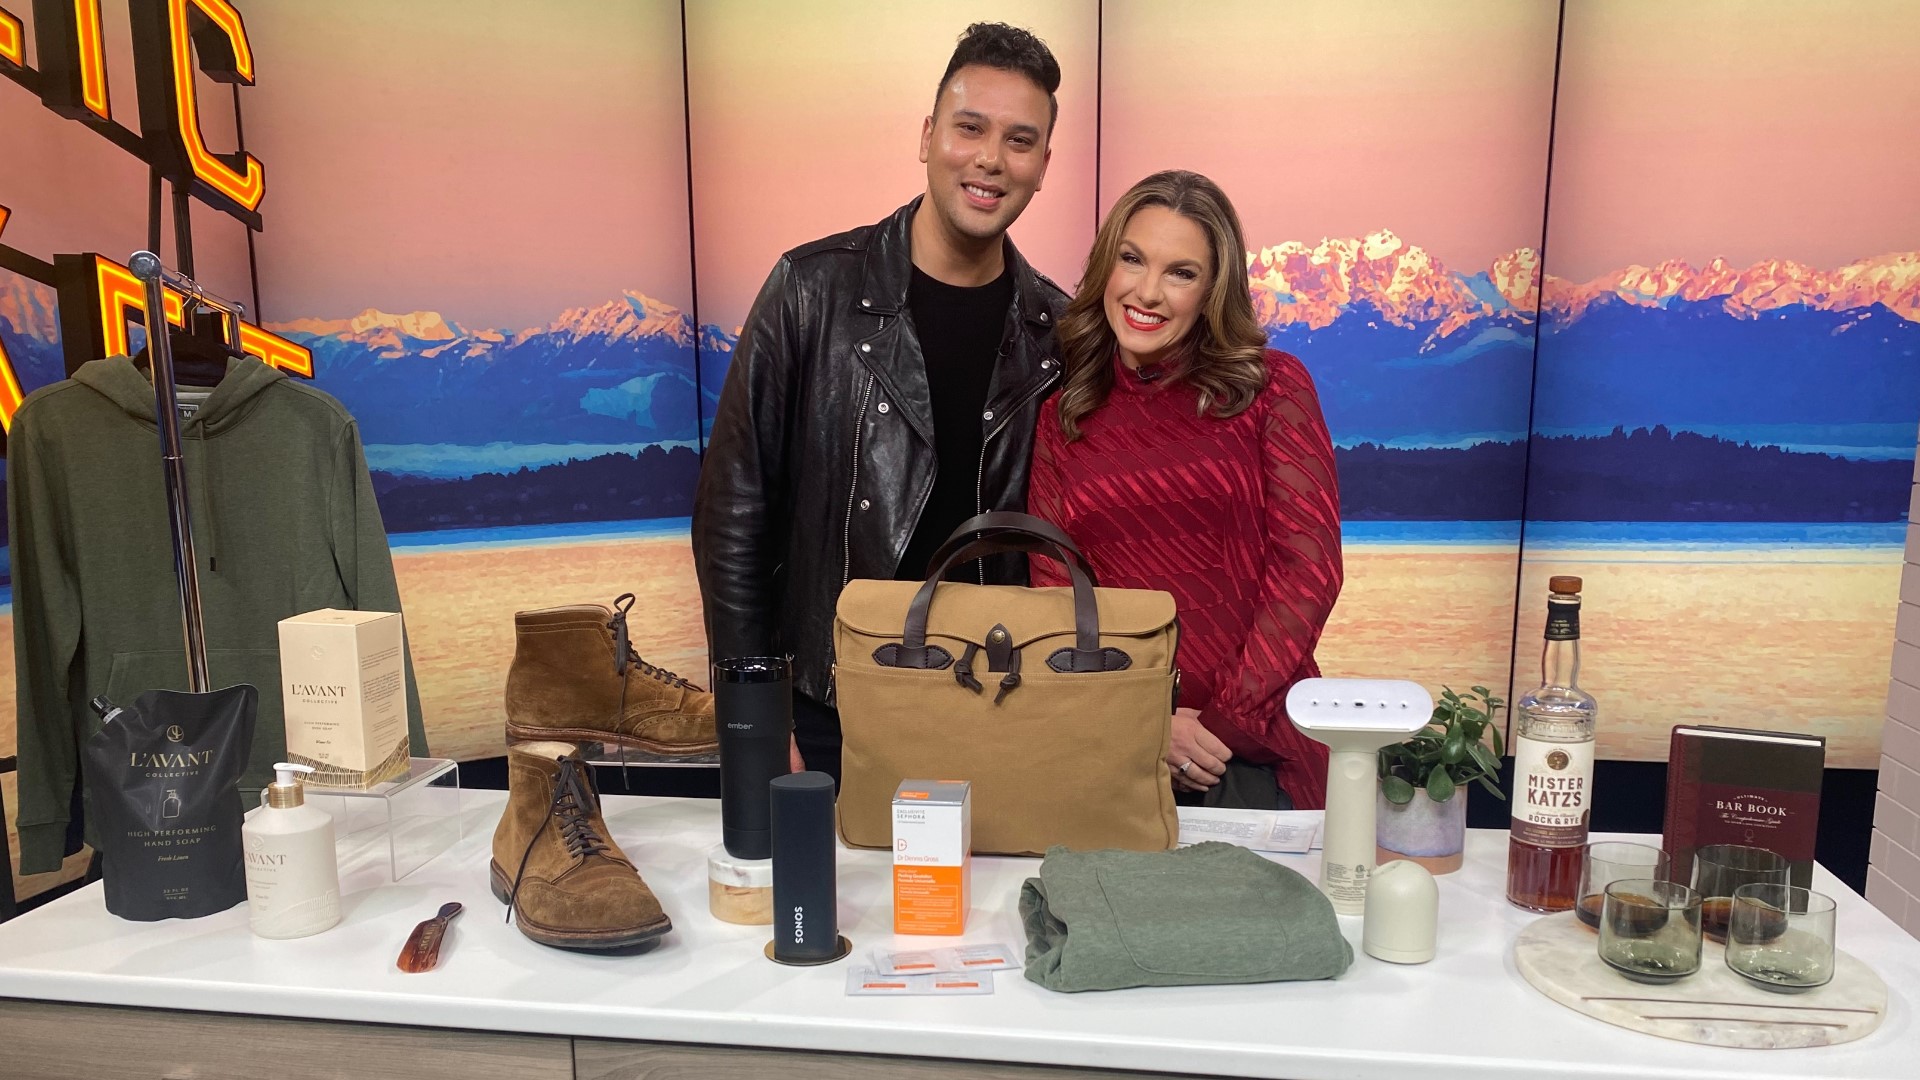 425 Magazine fashion writer and creative director Andrew Hoge joined the show to share stunning local gifts for the men in your life! #newdaynw